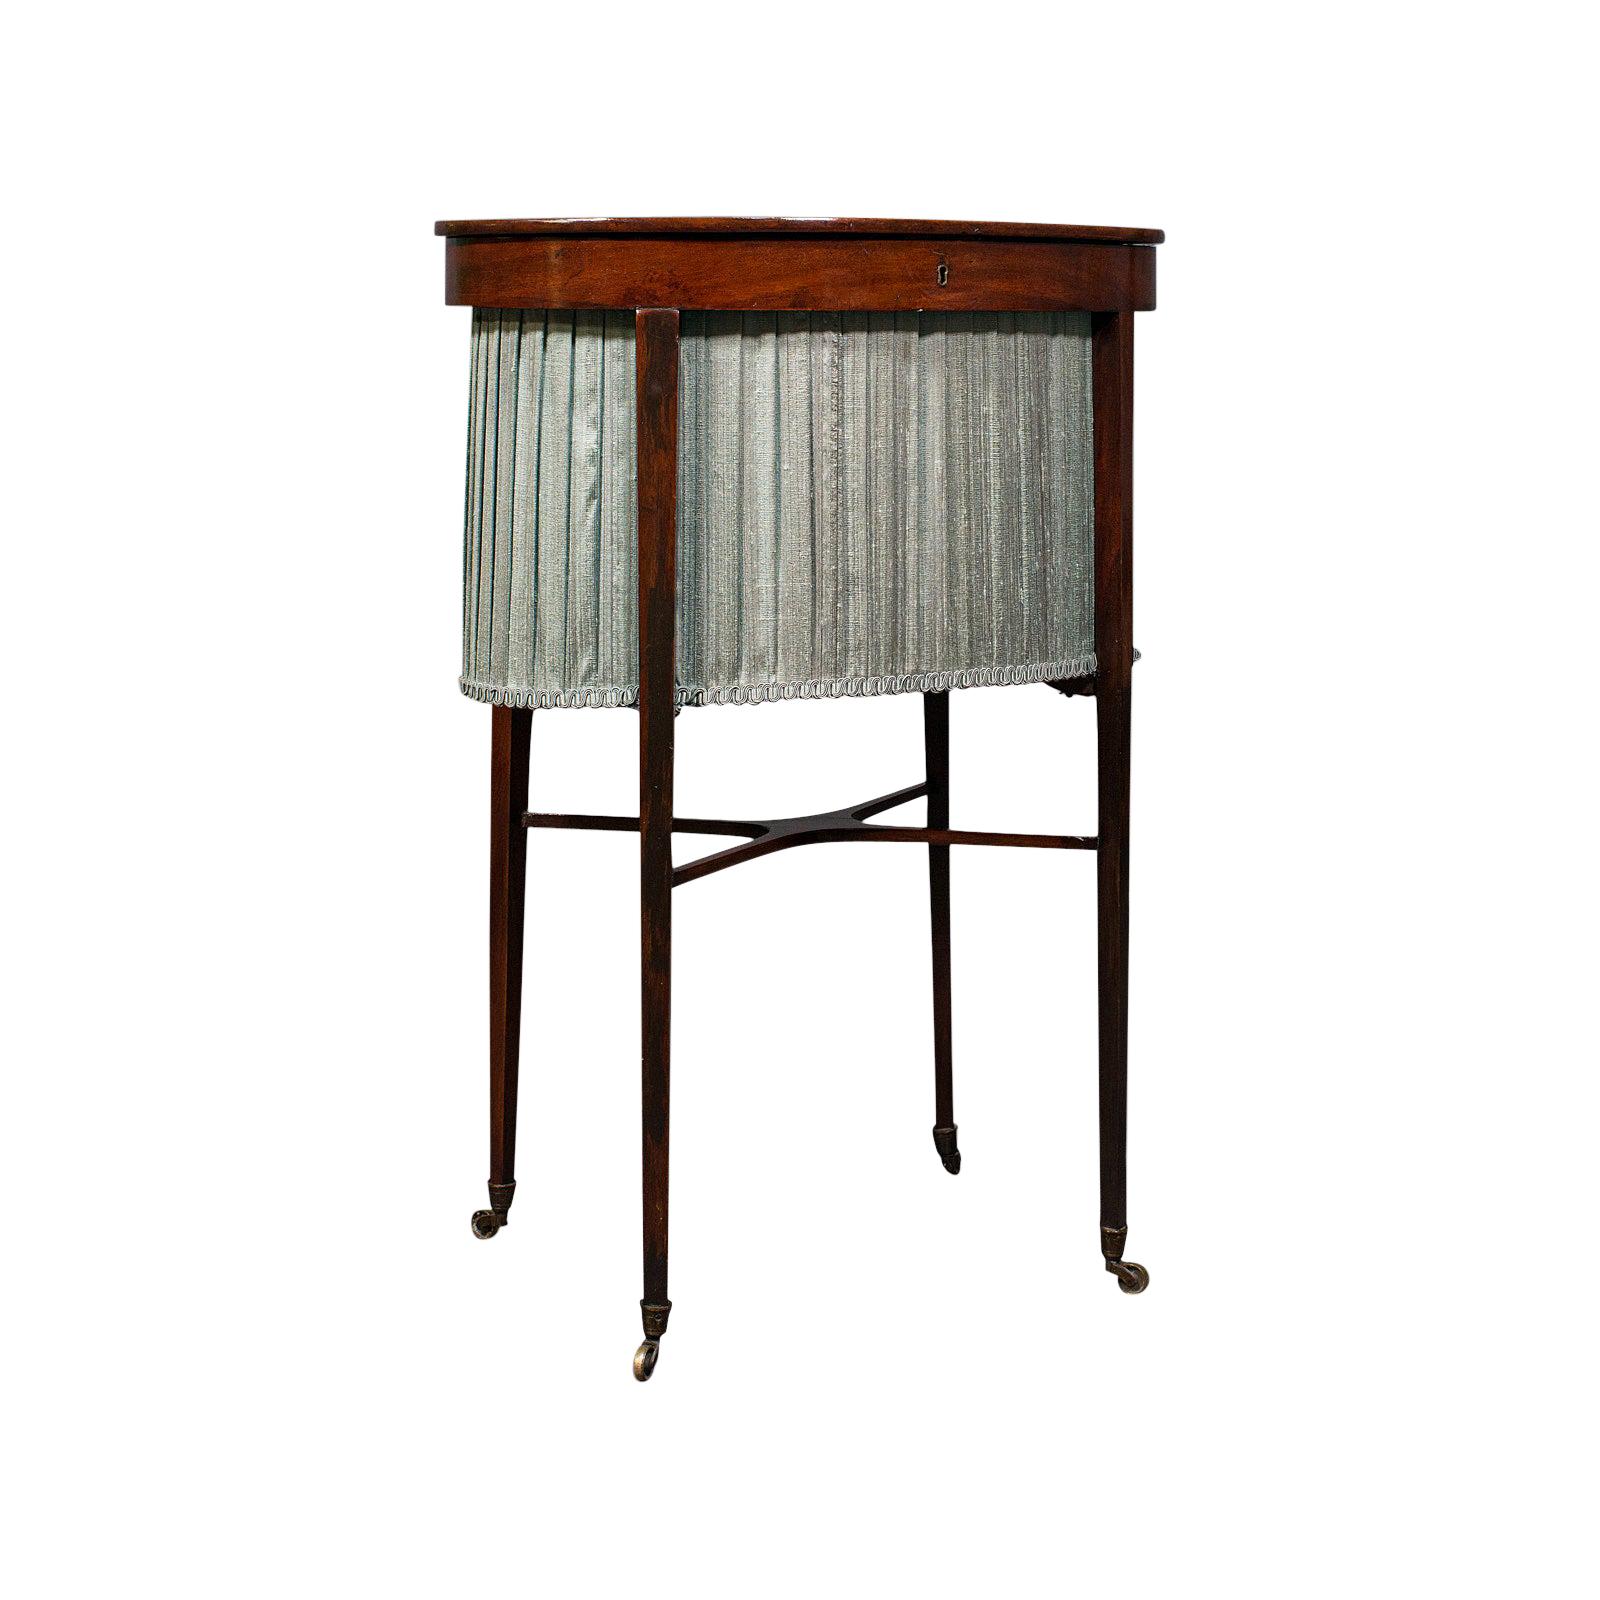 Antique Sewing Table, English, Mahogany, Silk Cotton, Work, Regency, Circa 1820 For Sale